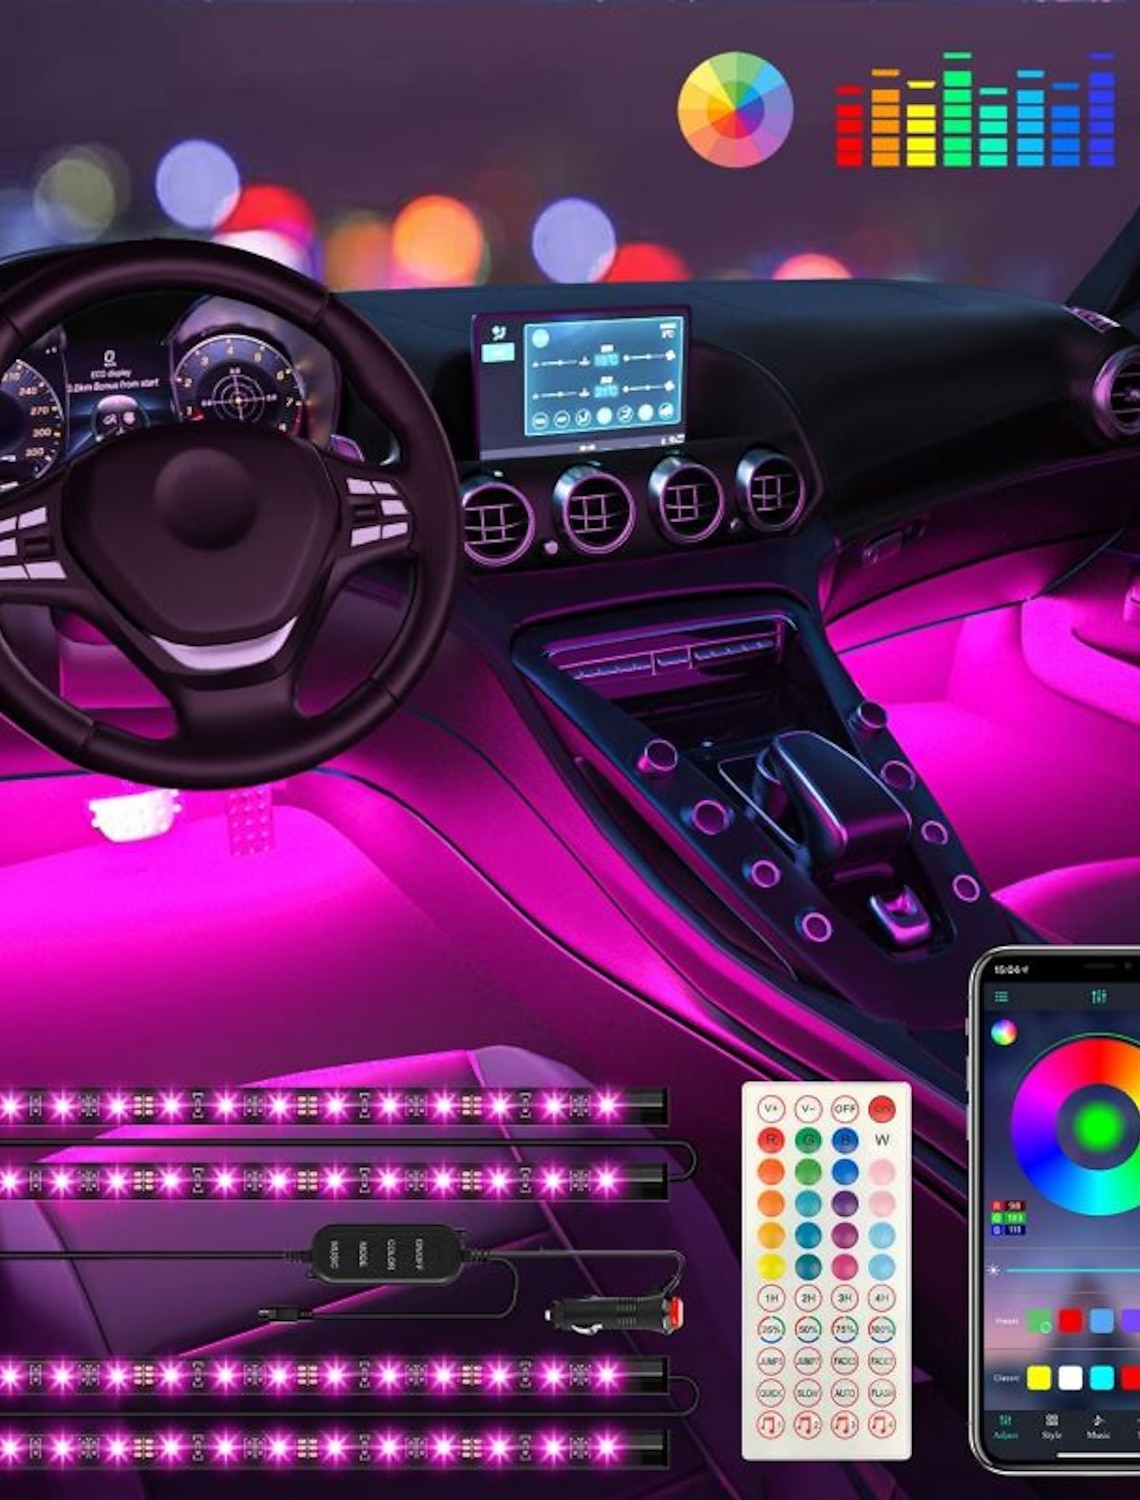 Under Dash Lighting Kit for iPhone Android Smart Phone OXILAM Car LED Strip Light Sound Active Function Wireless Remote and APP Control 4pcs 48 LED Multicolor Music LED Car Interior Lights 